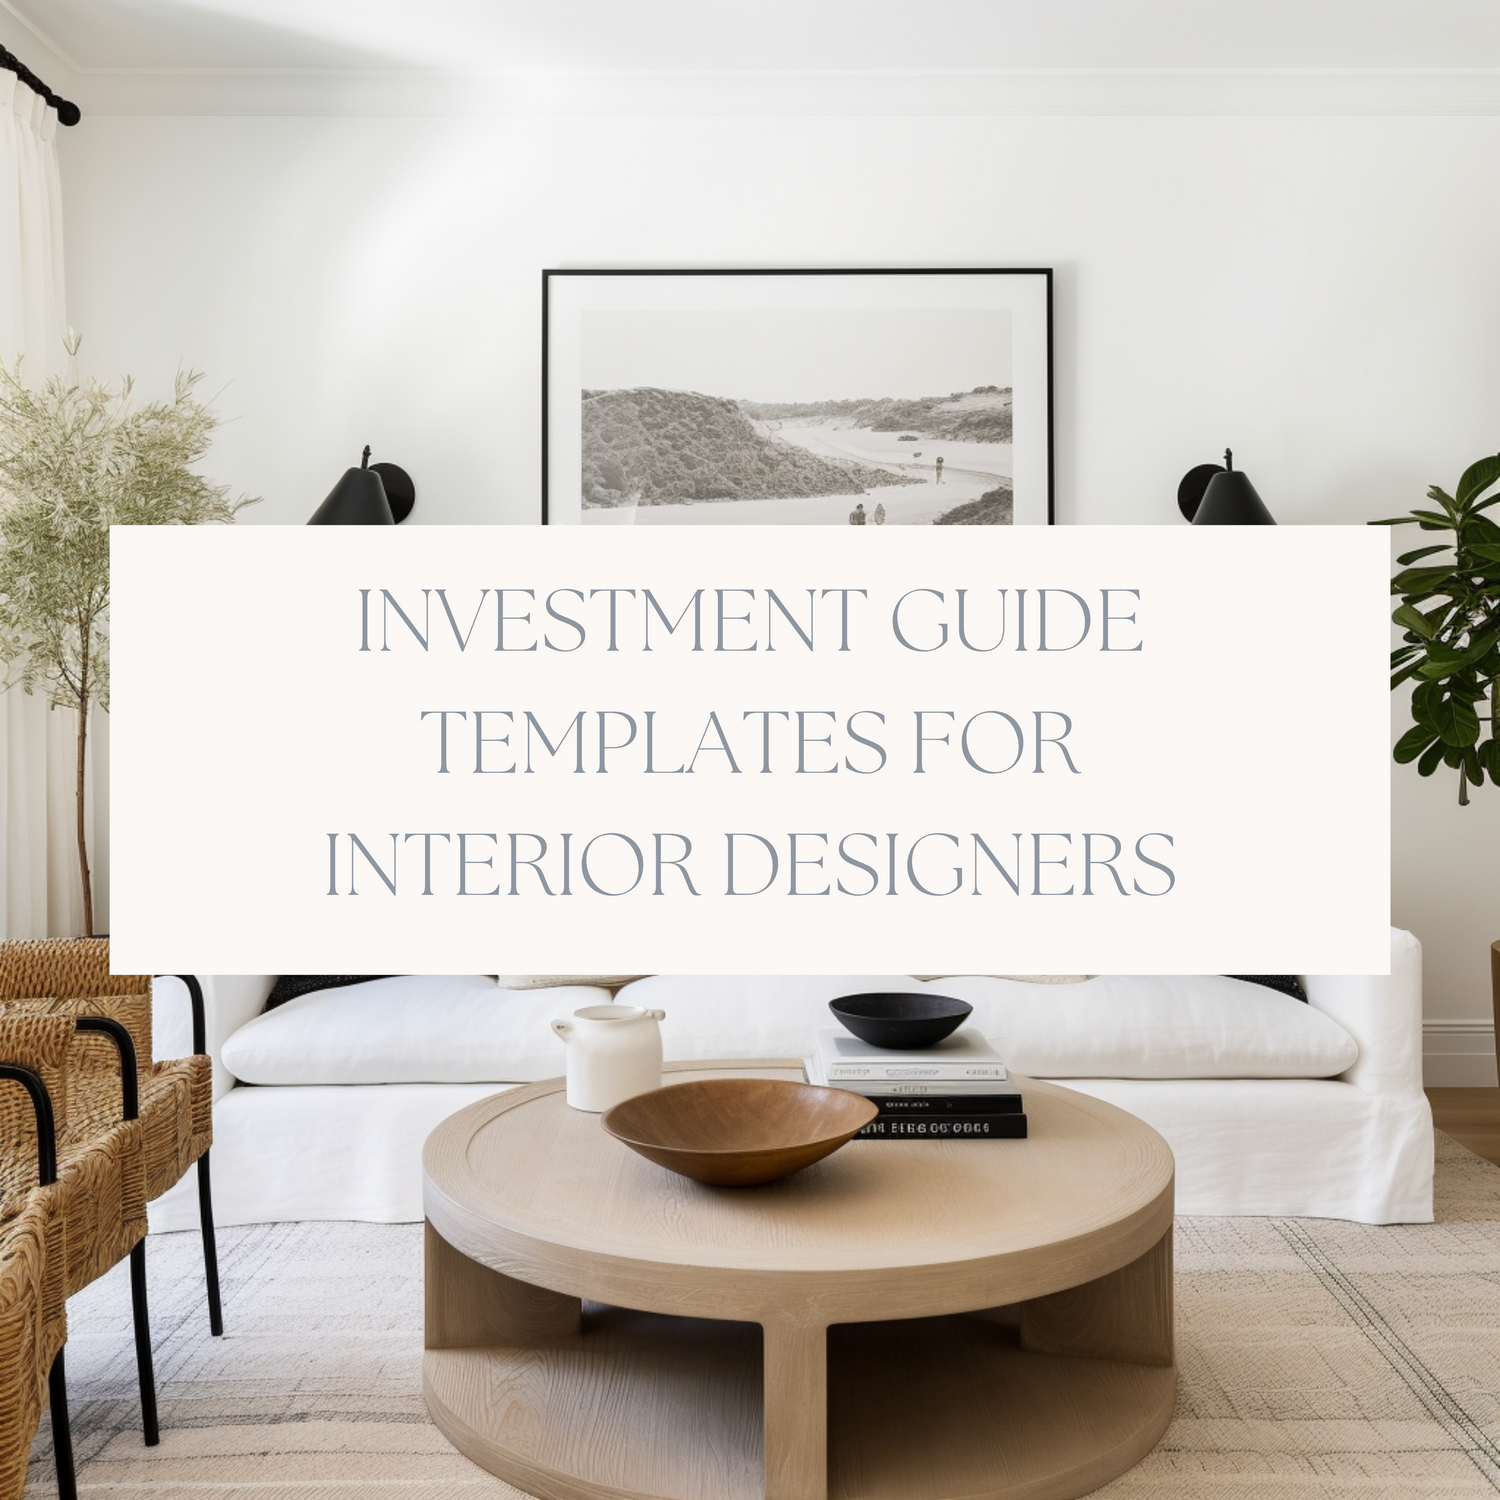 INVESTMENT GUIDE FOR INTERIOR DESIGNERS